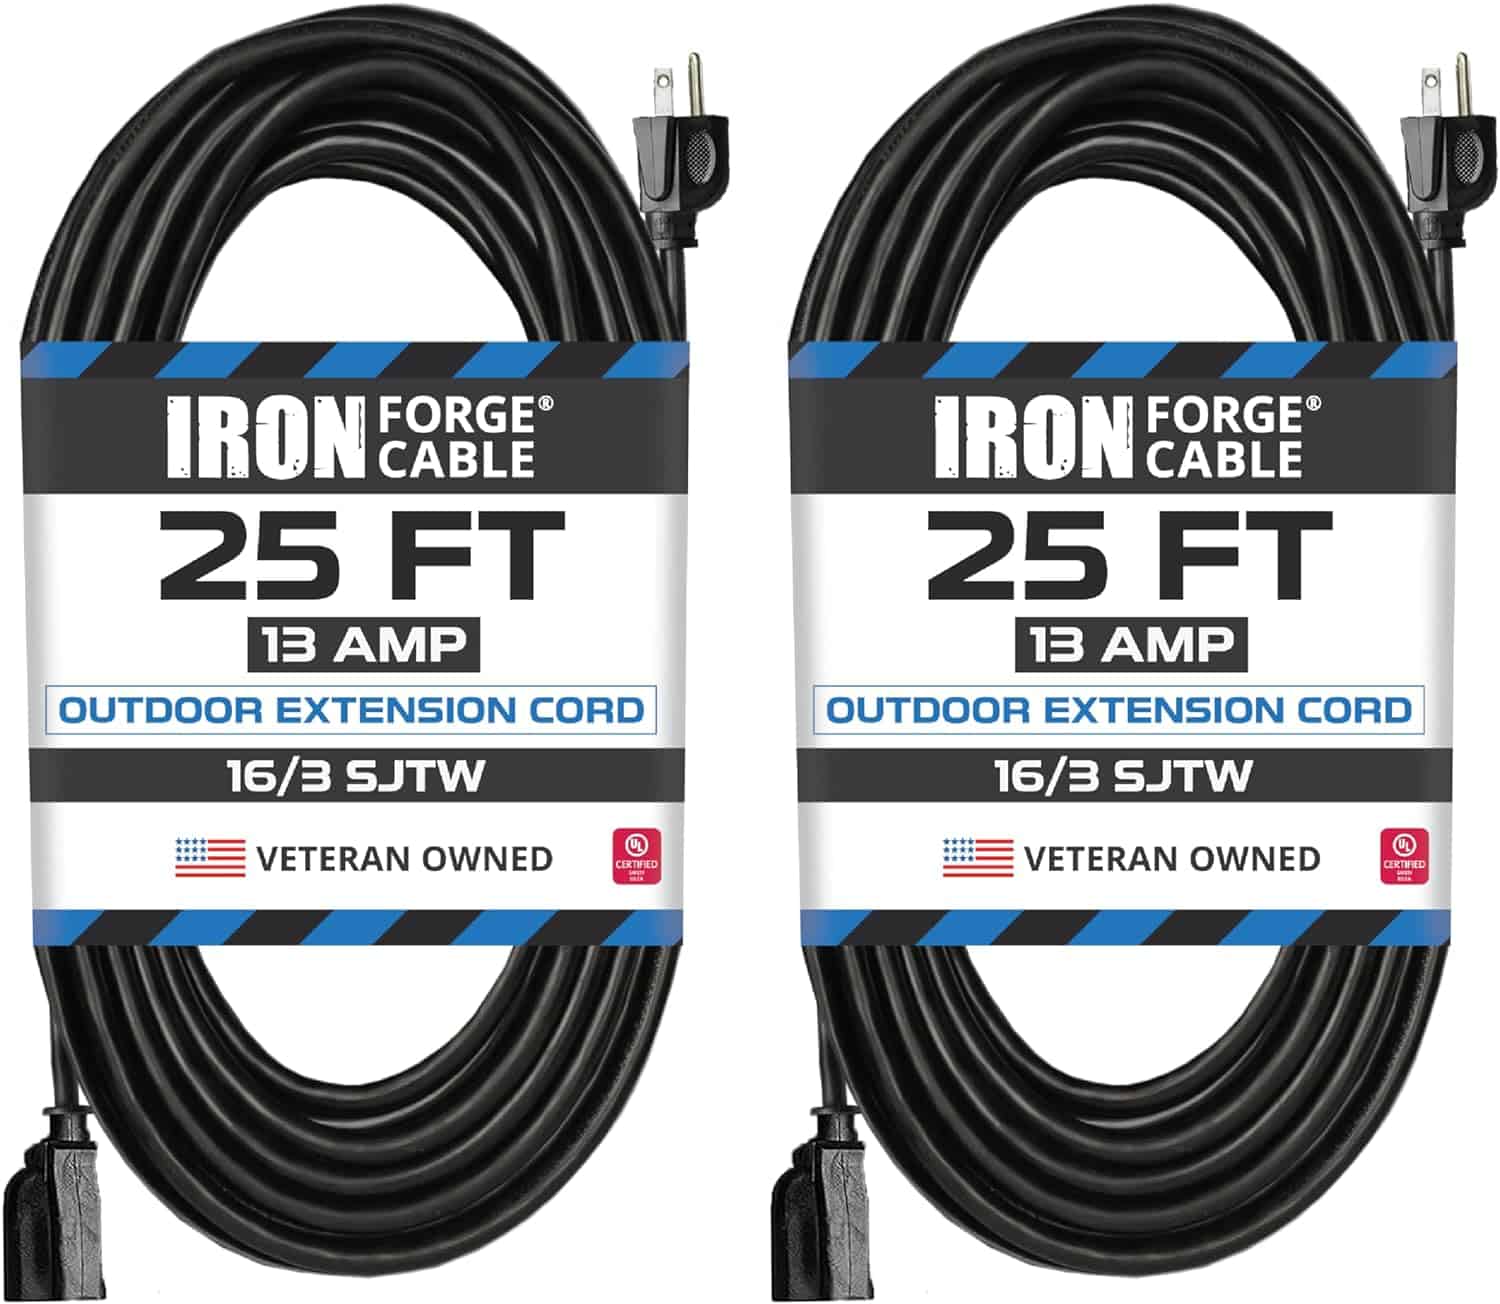 Iron-Forge-Cable-2-Pack-25-Ft-Extension-Cord-16-3-Black-25-Foot-Extension-Cord-Indoor-Outdoor-Use-3-Prong-Multipack-Weatherproof-Extension-Cord-Gr